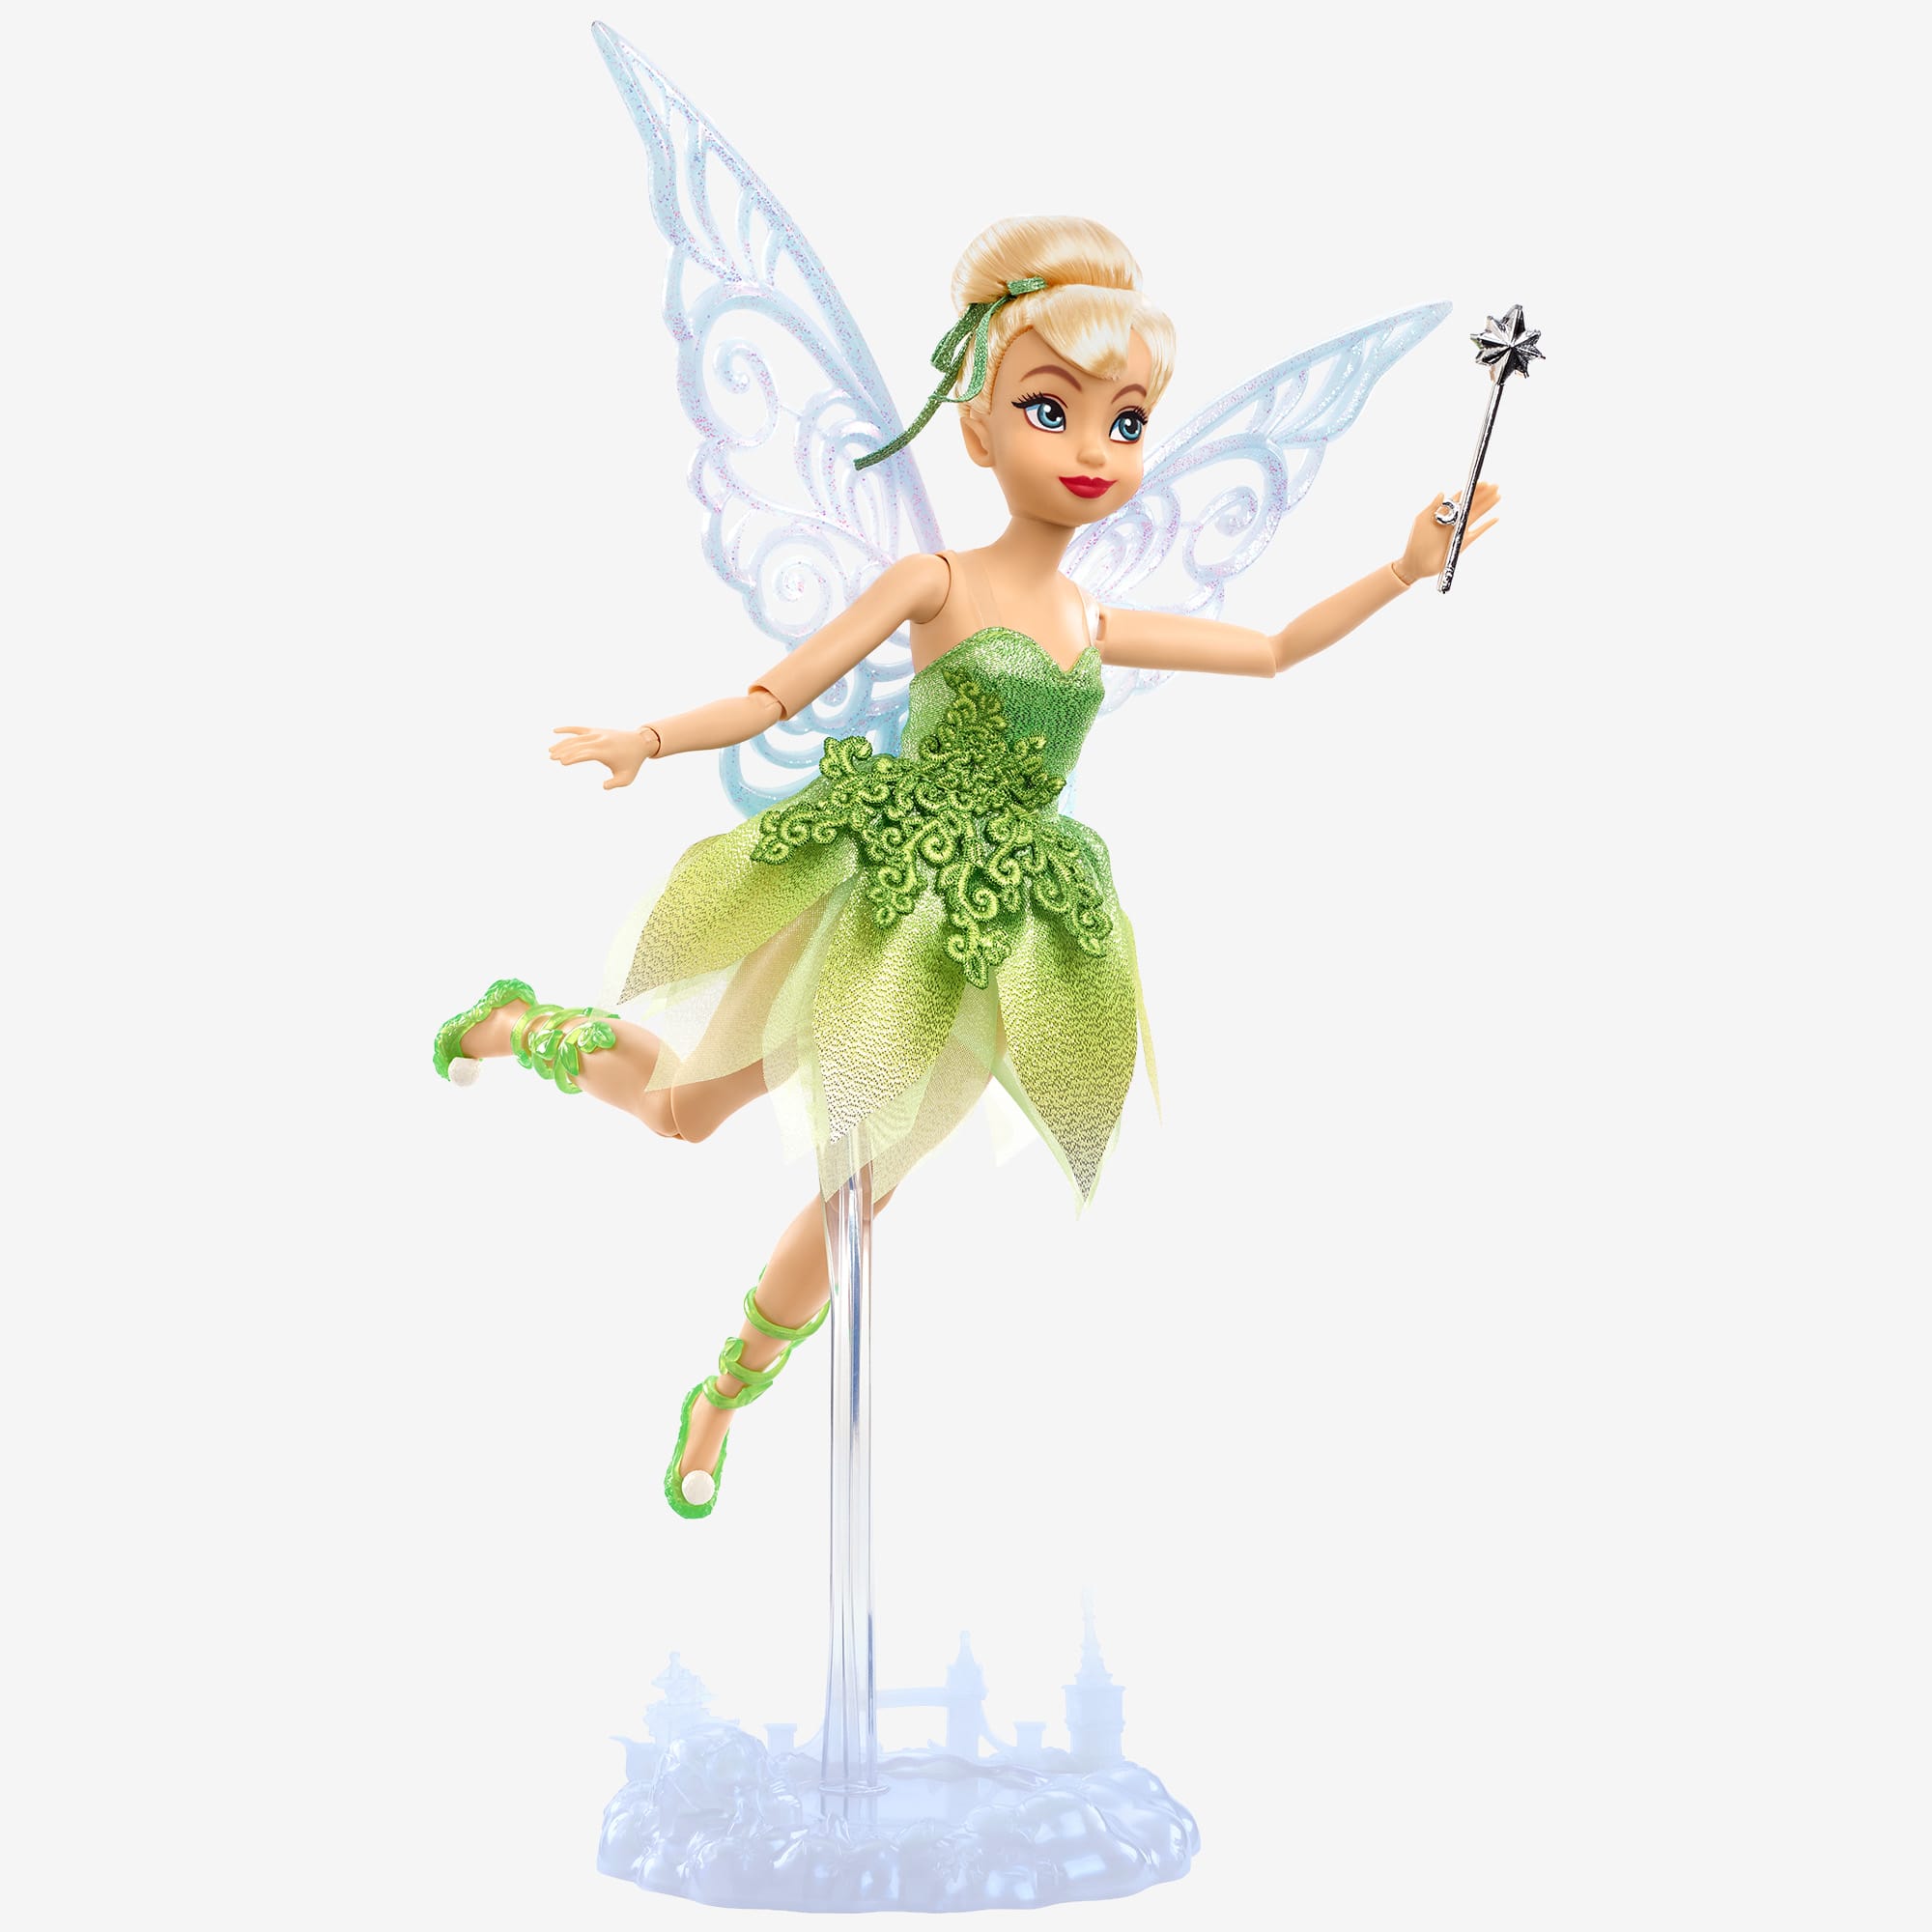 Tinker Bell & Fairies Toys, Clothing, Accessories & More